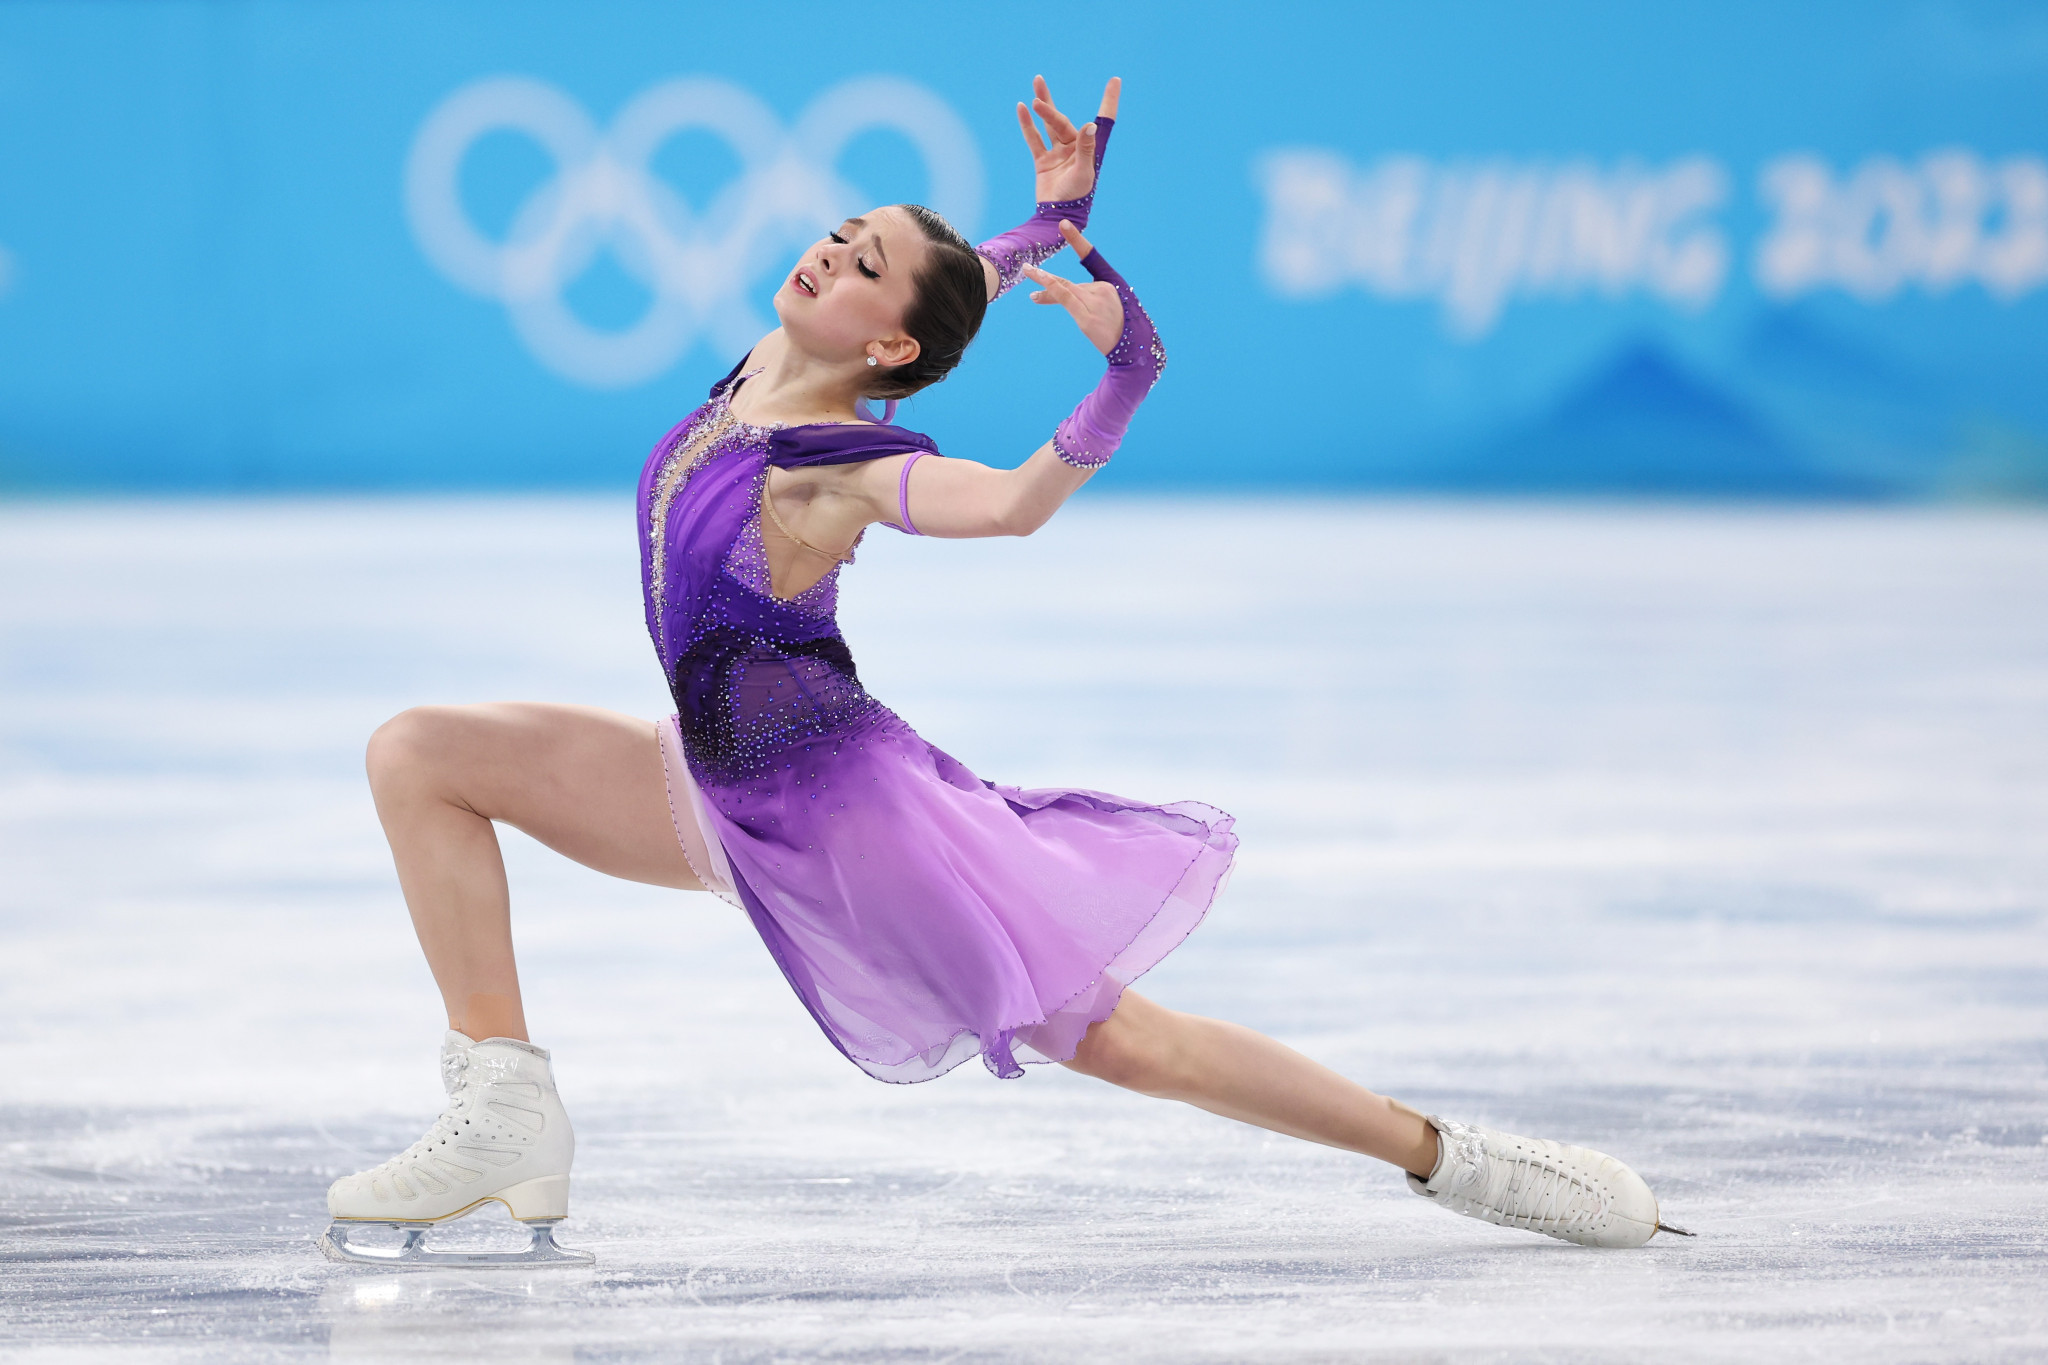 Kamila Valieva's drug scandal raised fresh questions over the ISU's minimum age limit for figure skaters ©Getty Images